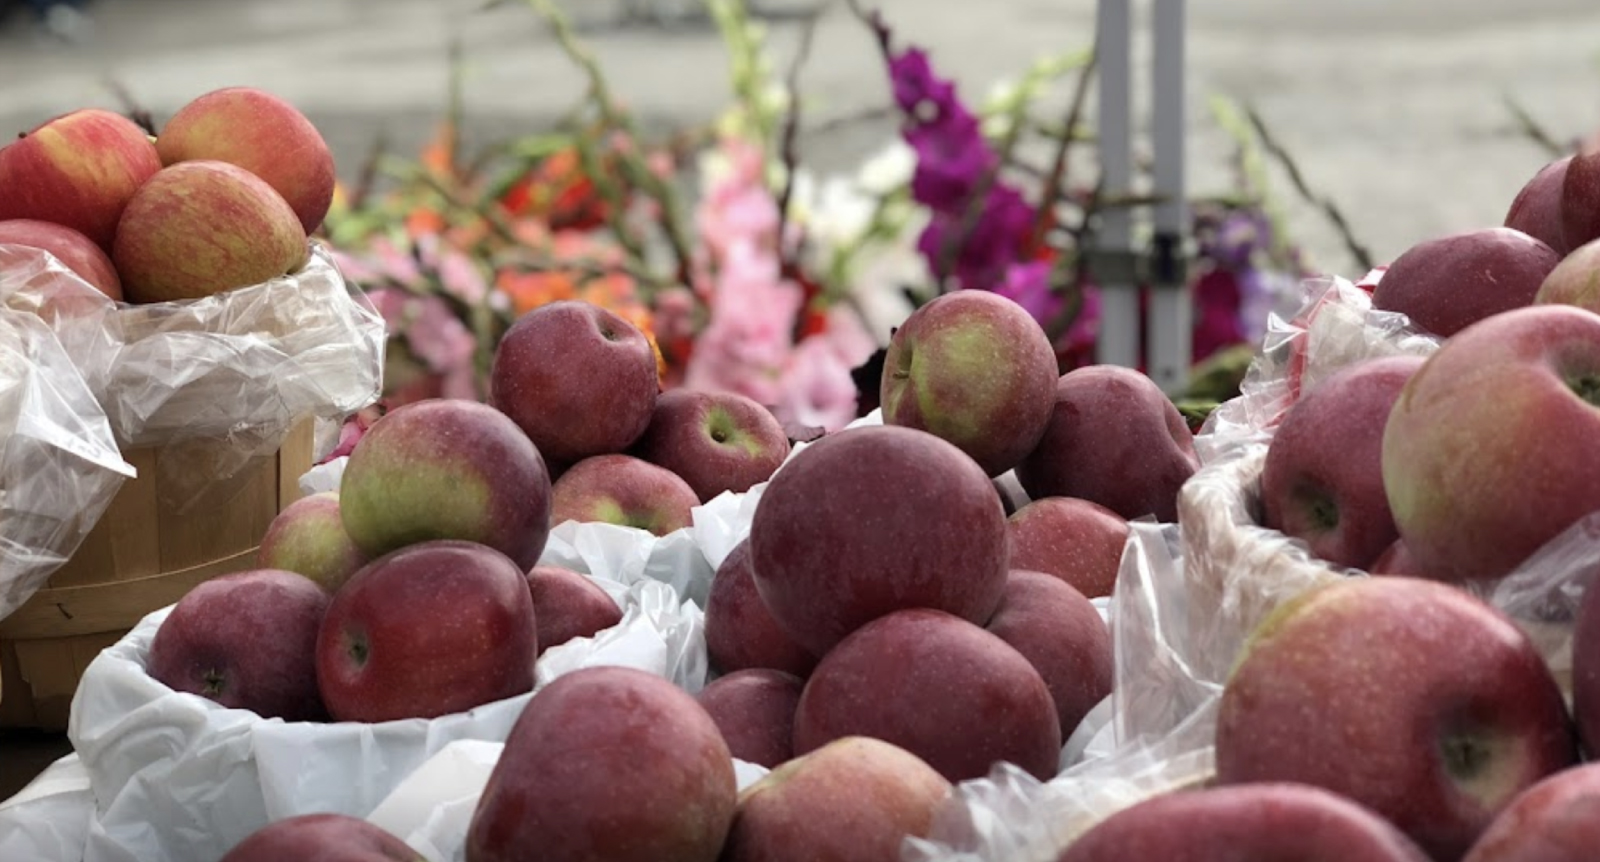 Photograph of apples at farmers' market.